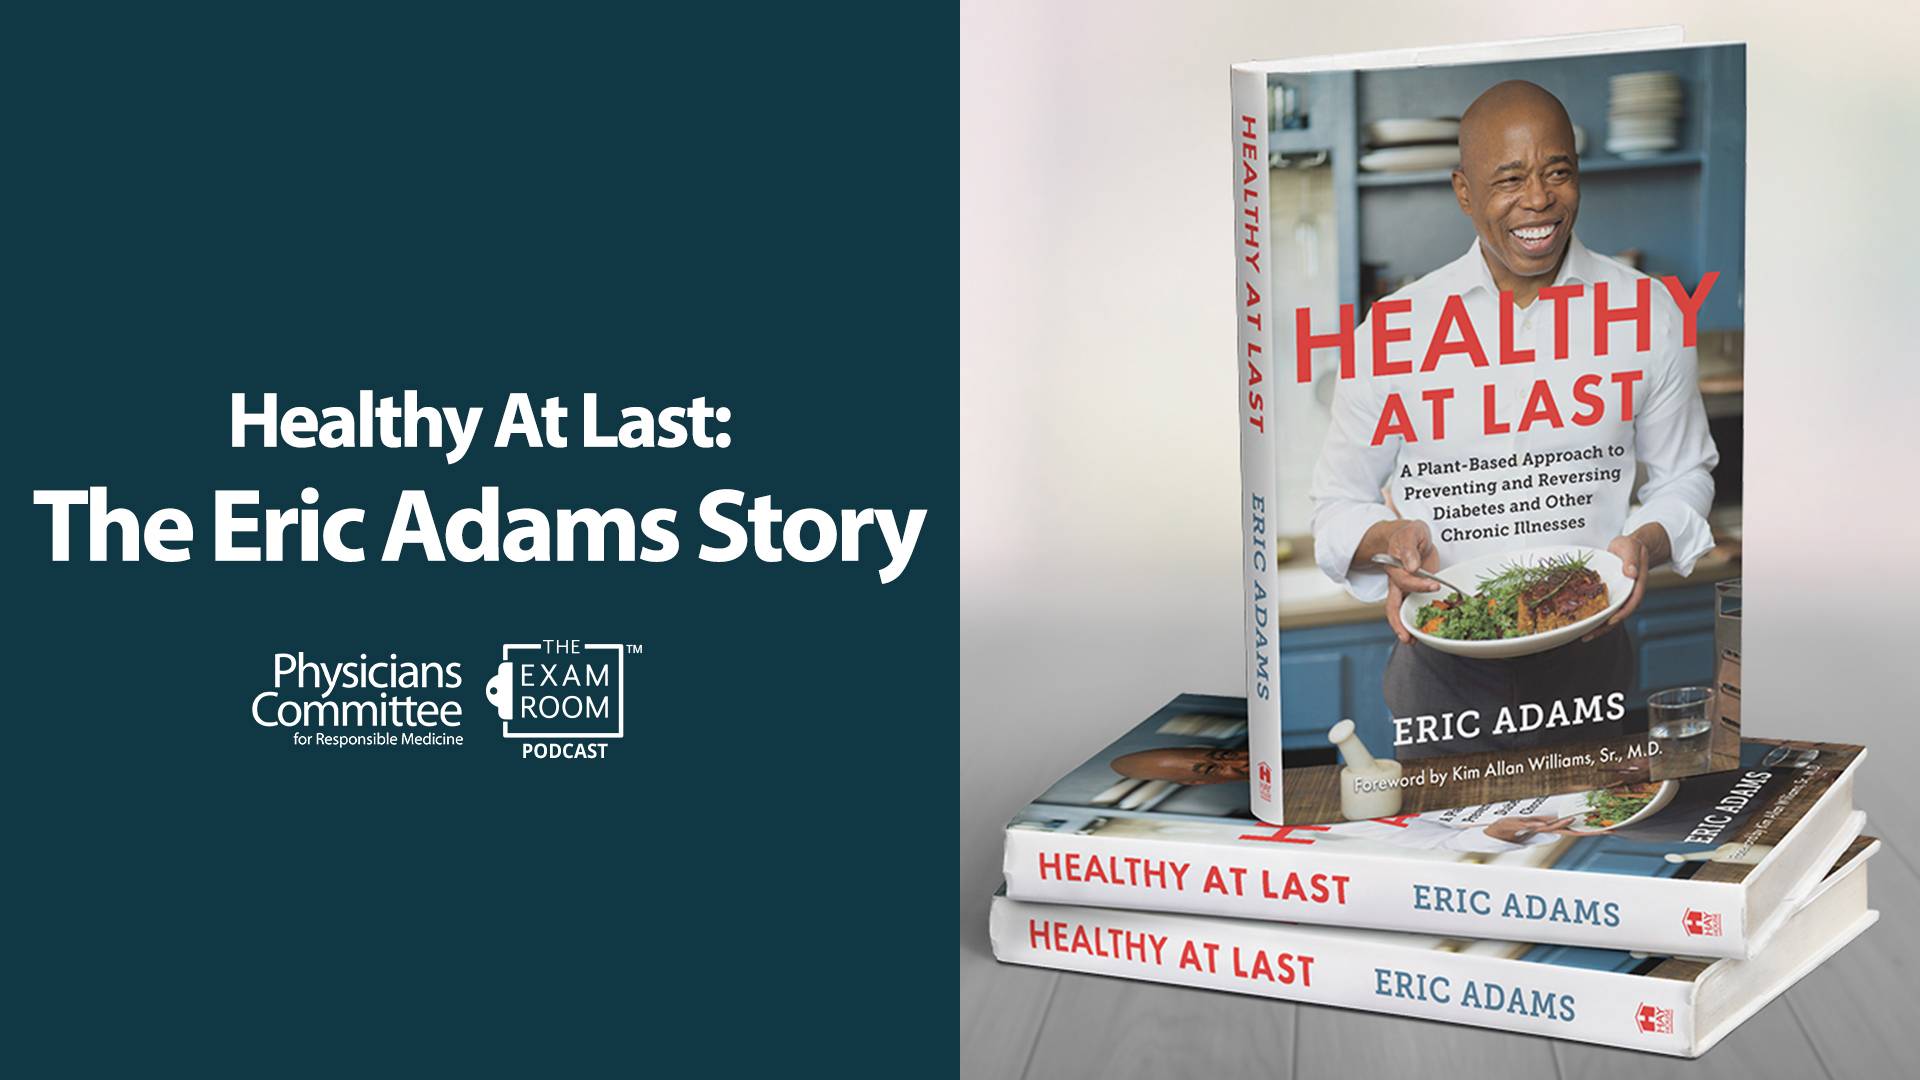 Healthy at Last: The Eric Adams Story